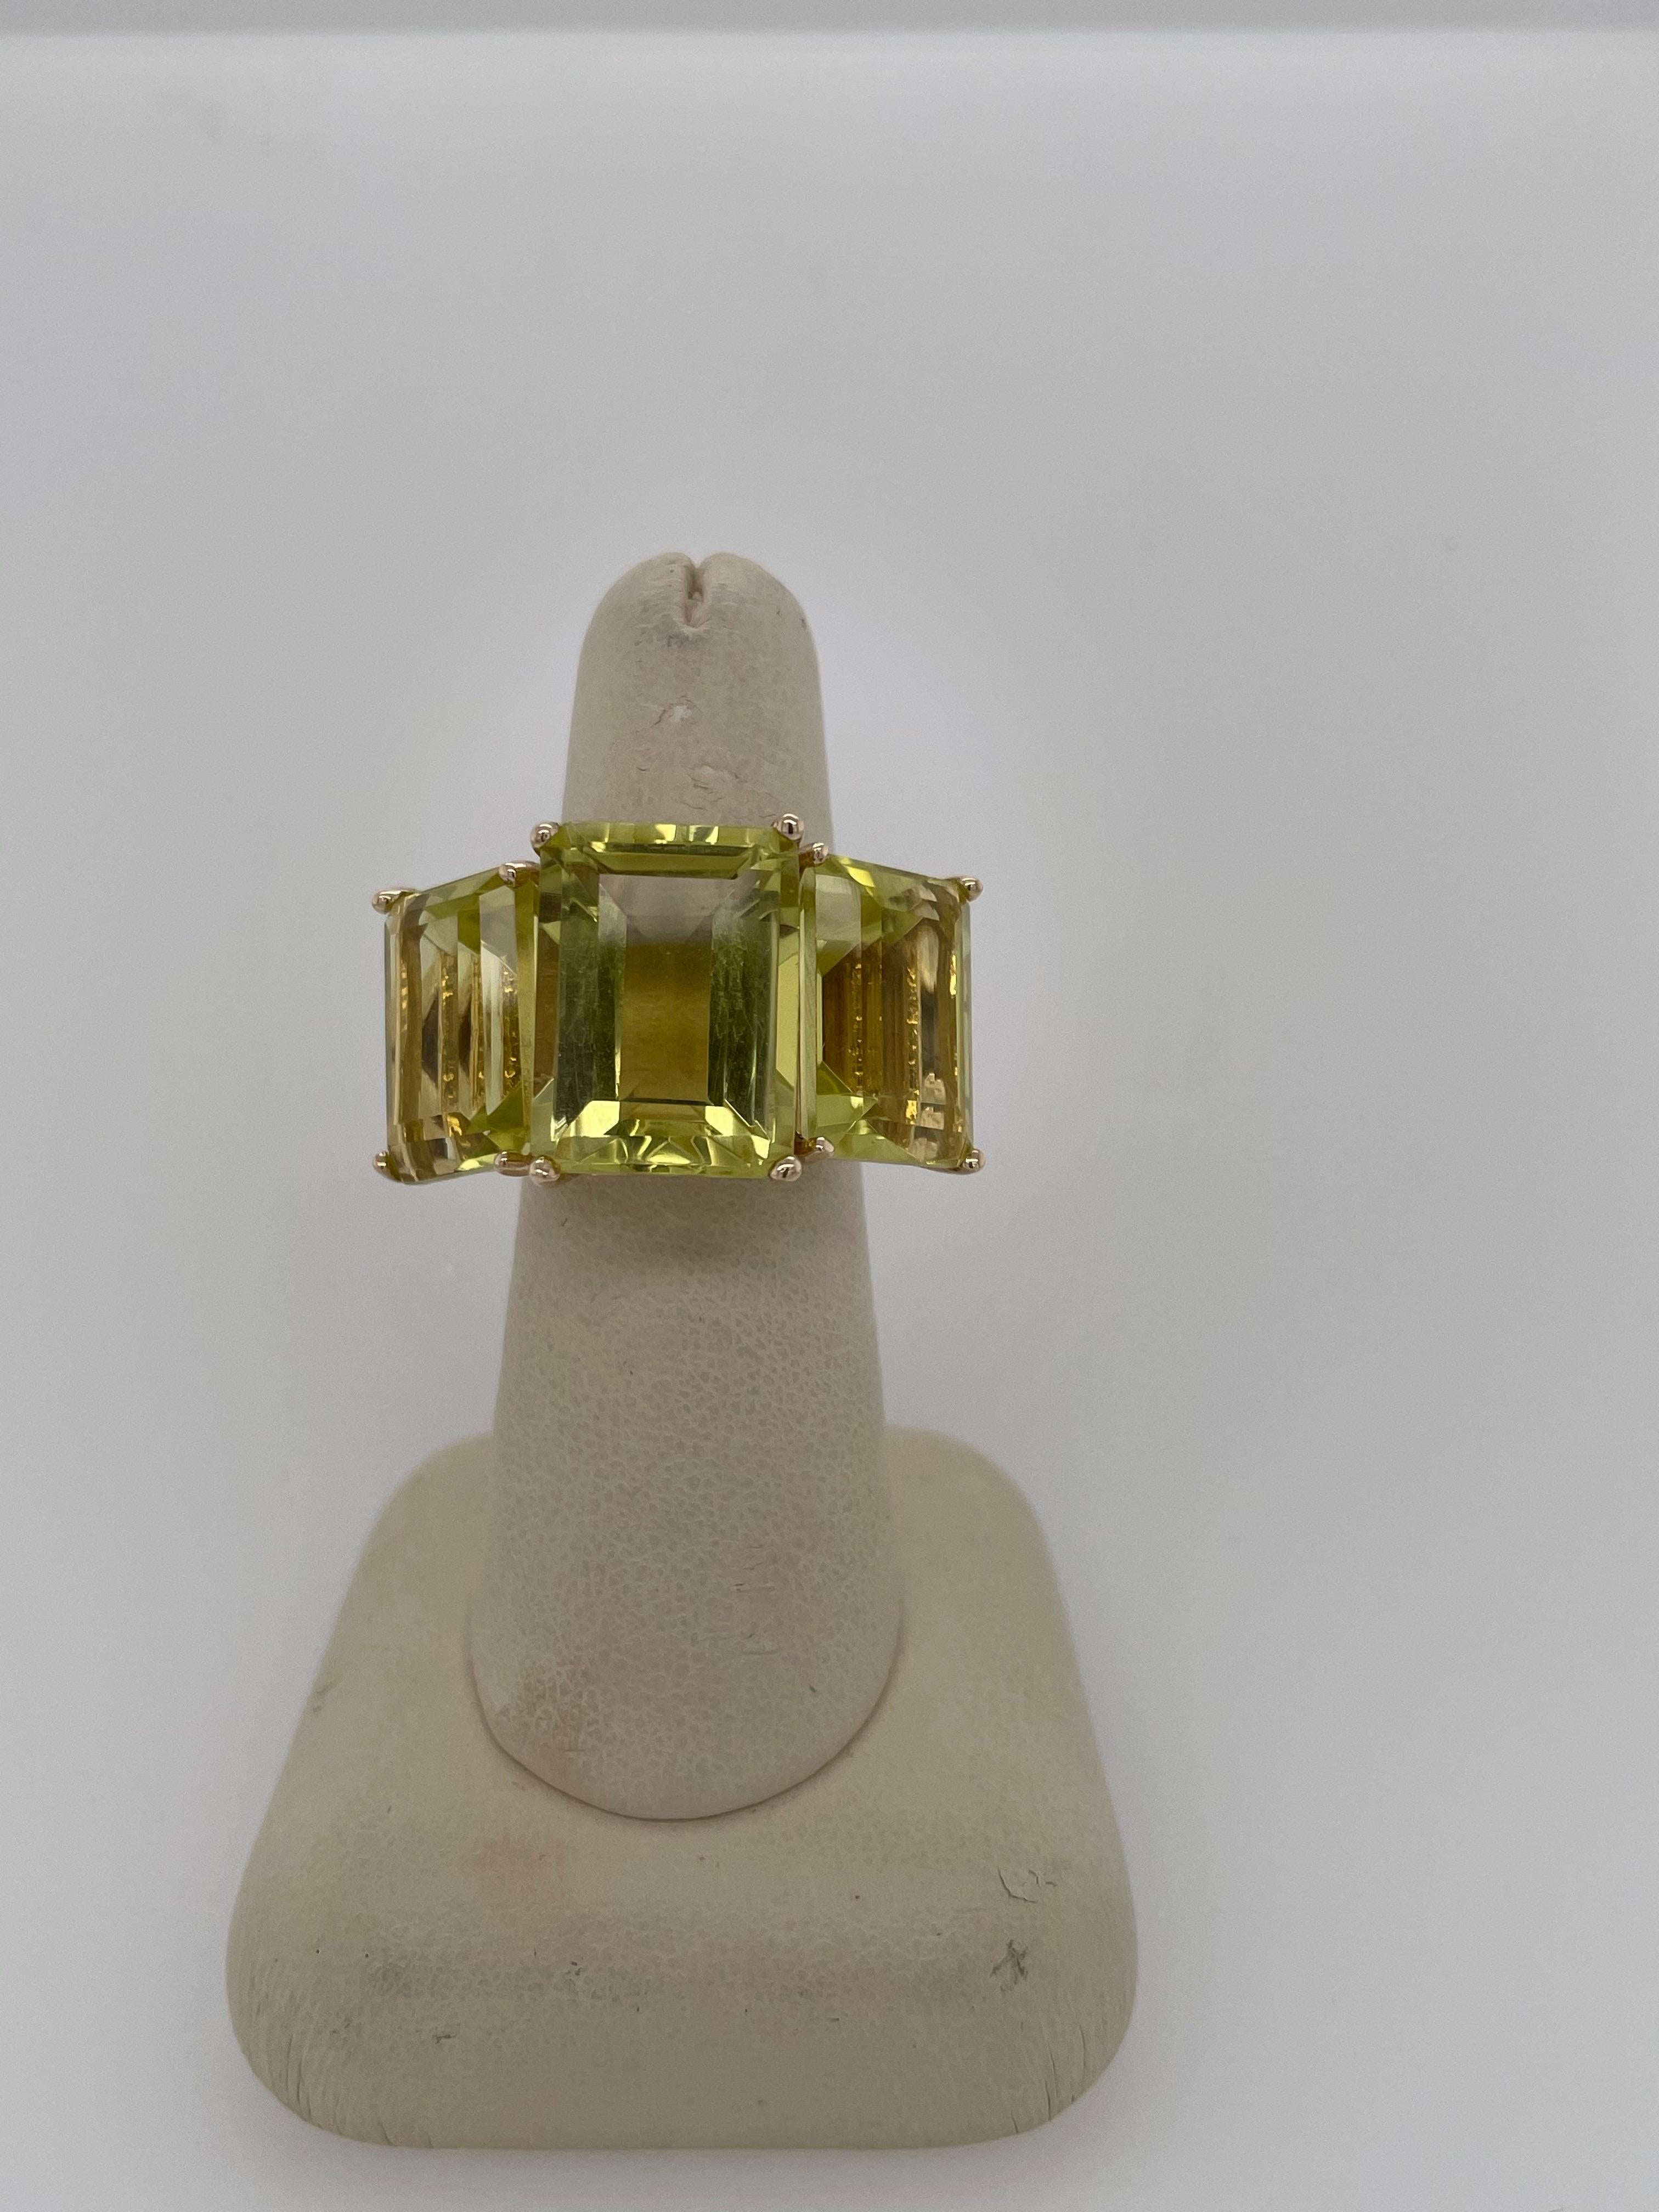 Stunning 35 carat Lemmon Citrine Cocktail Ring!  This ring is sure to add some sparkle and pizzaz to your life! This ring is set in 18K yellow gold adorned with three stones: The center stone approximately 14 carats, two side stones that are